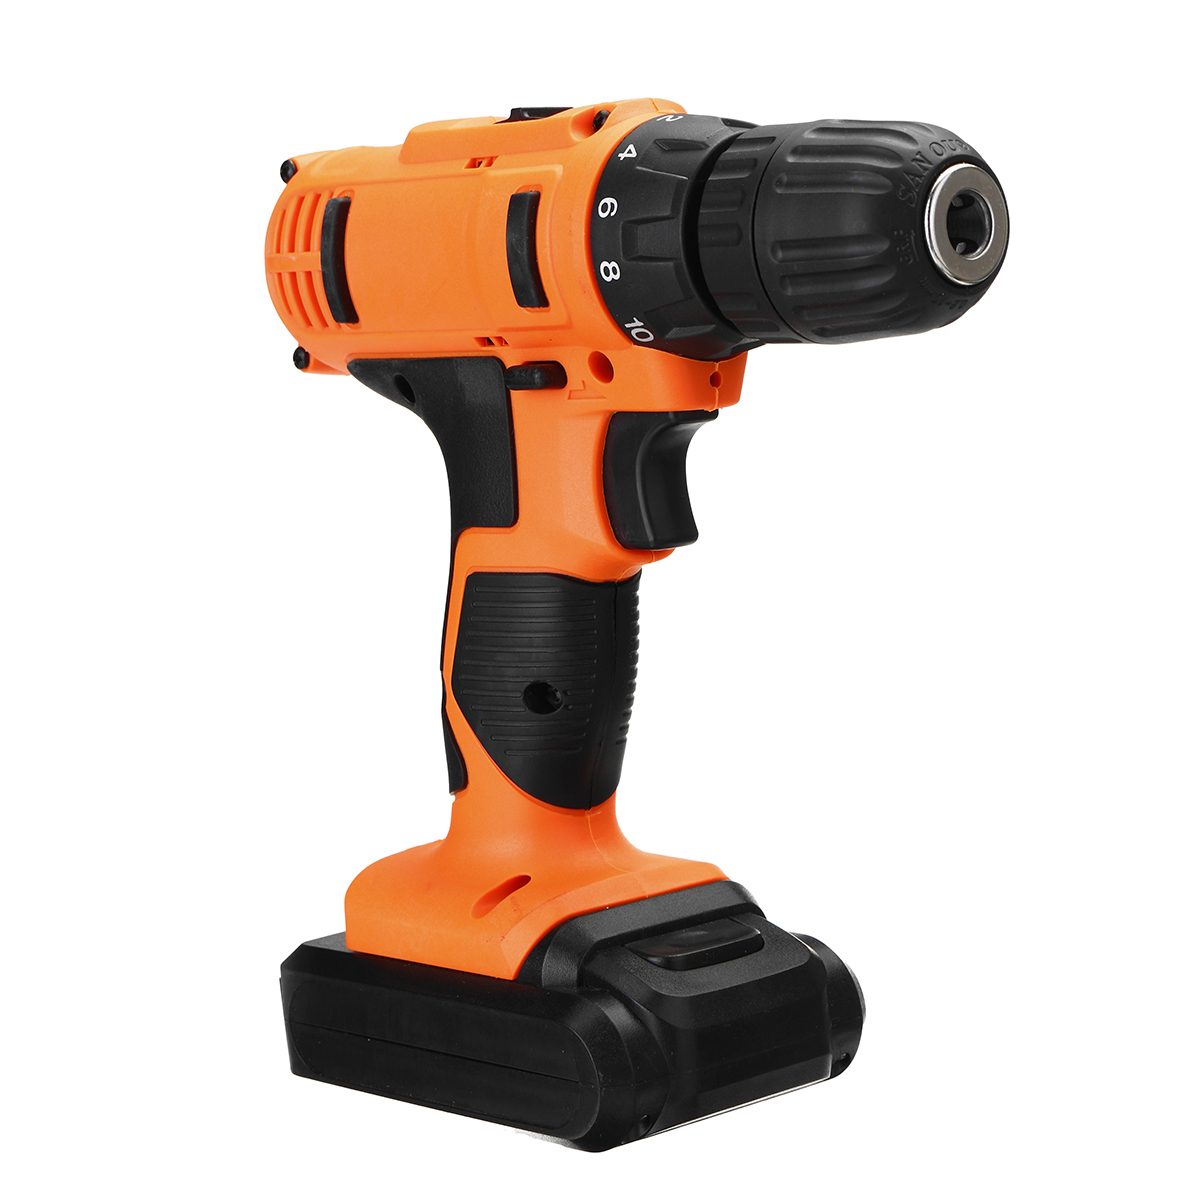 18V-Electric-Screwdriver-Cordless-Hammer-Impact-Power-Drill-Driver-Rechargeable-with-13Pcs-Drill-Bit-1324472-4